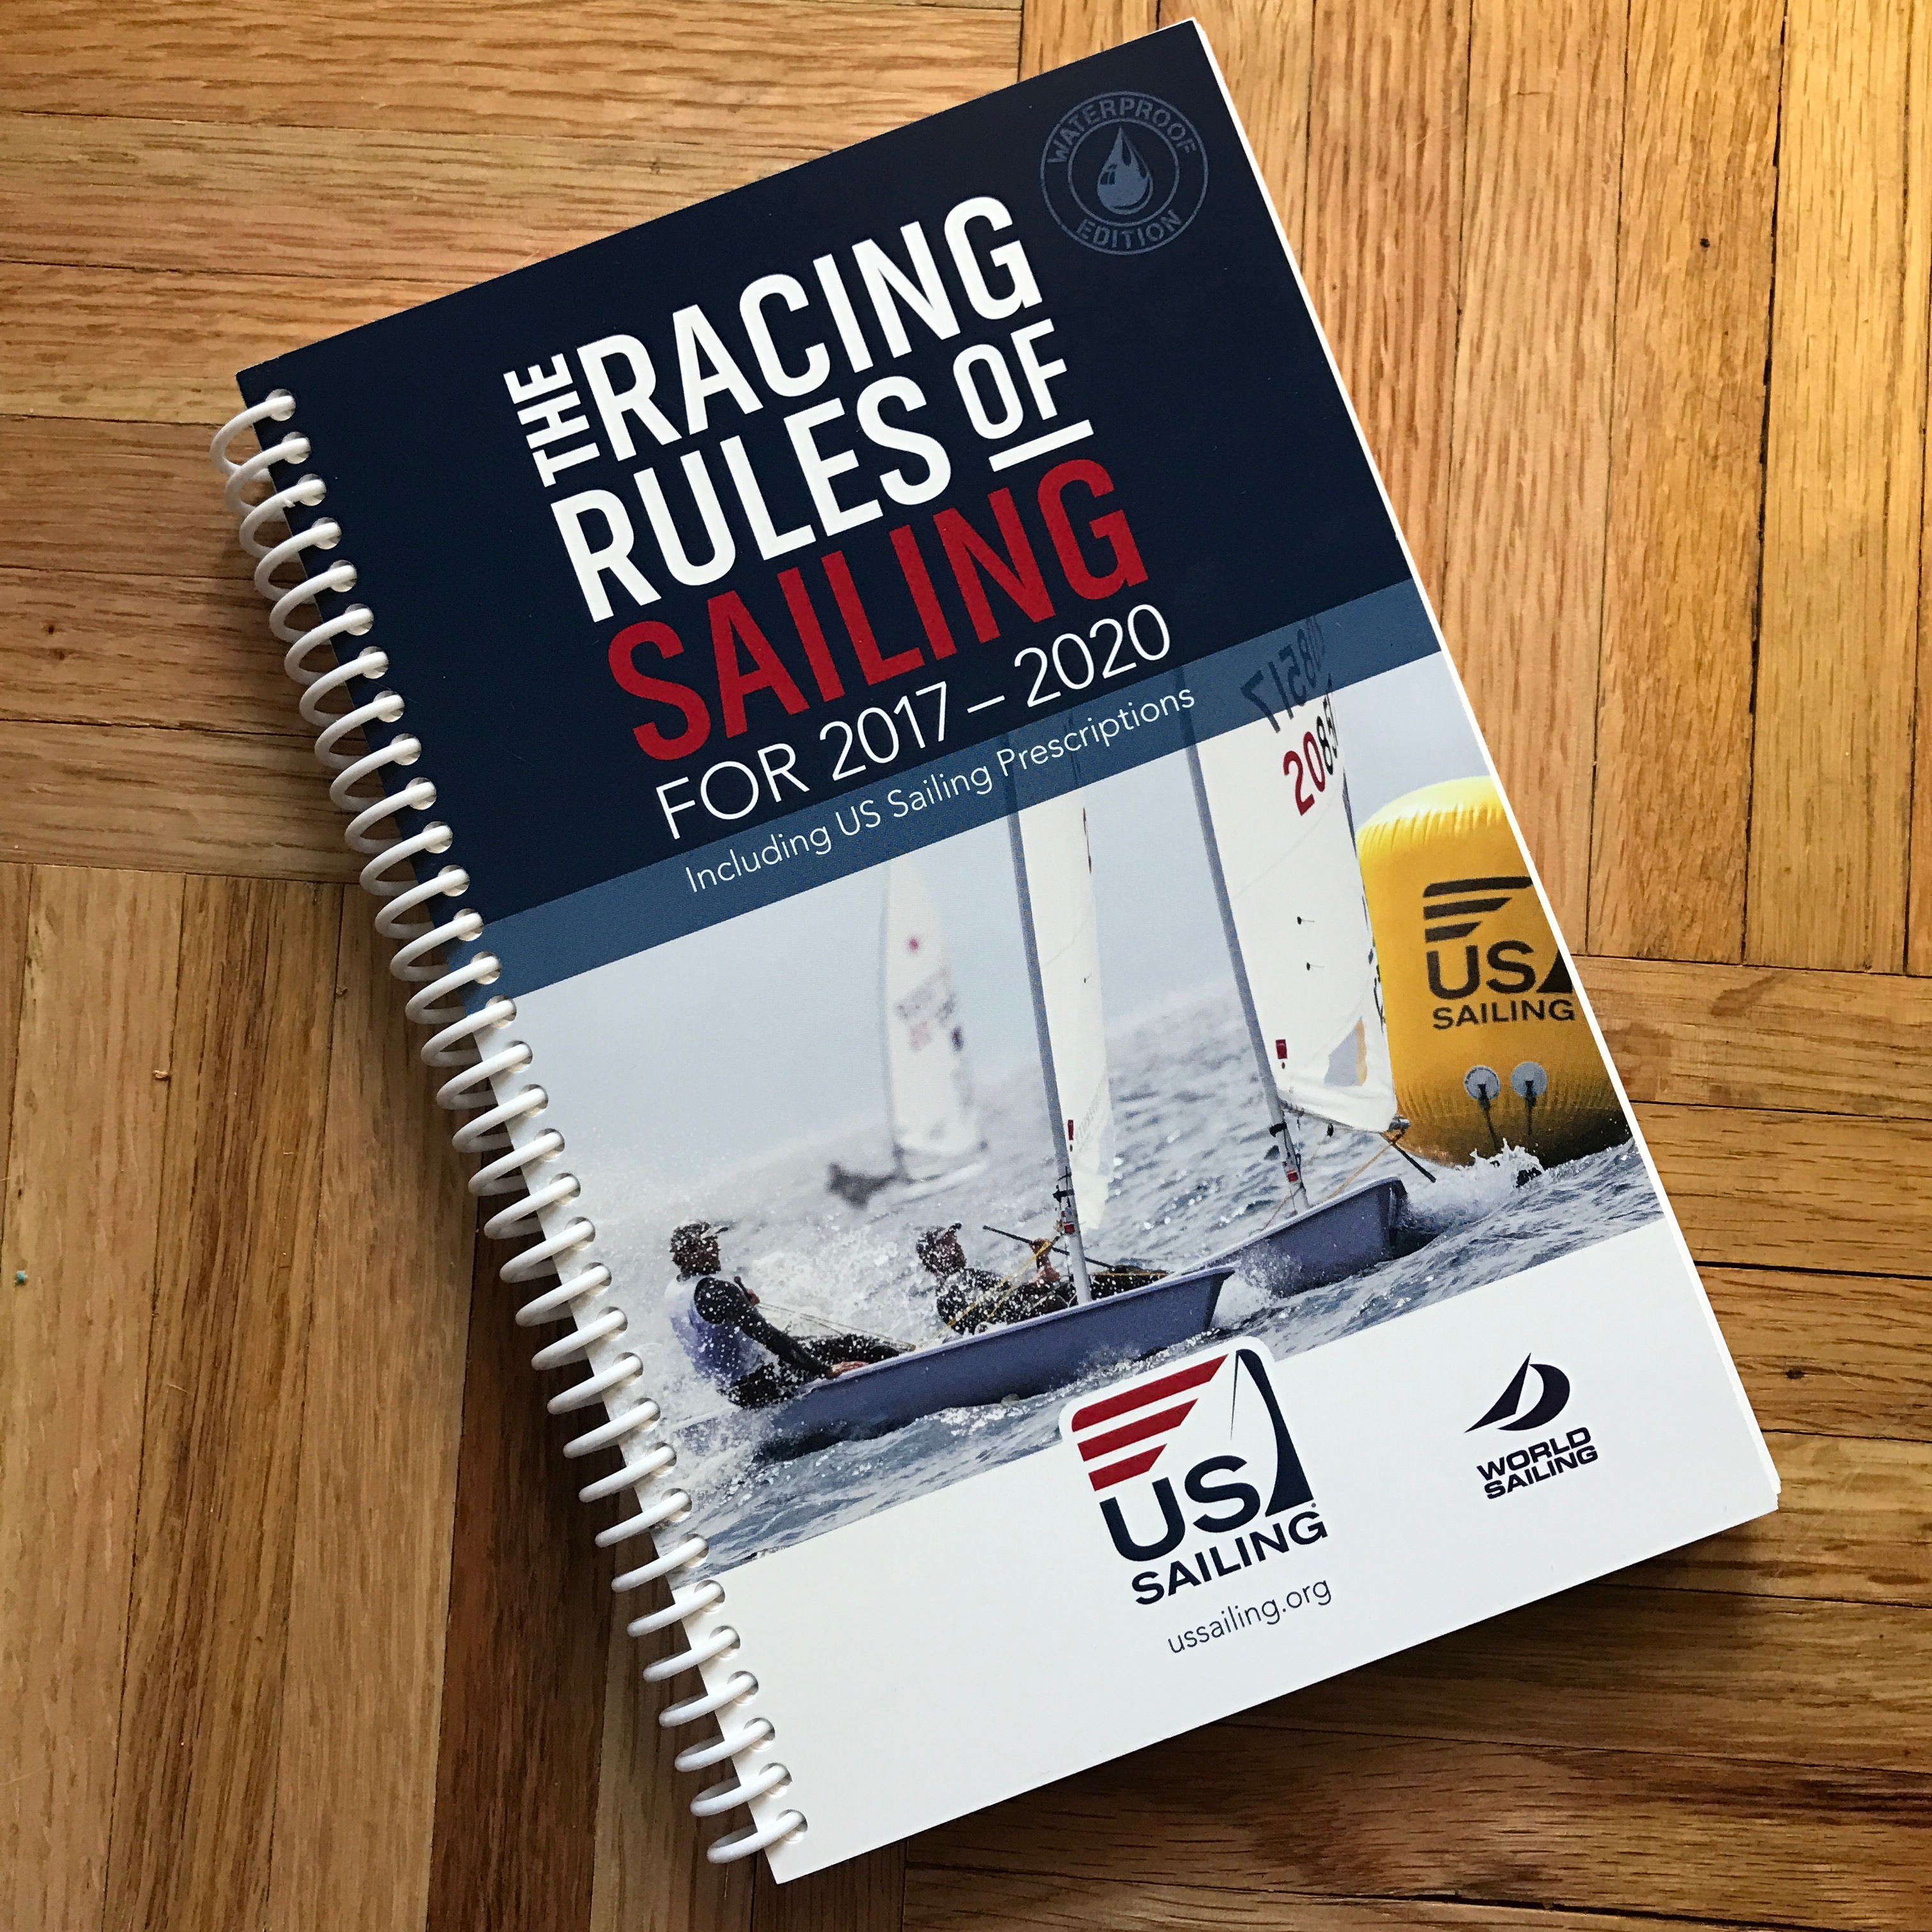 The Racing Rules of Sailing